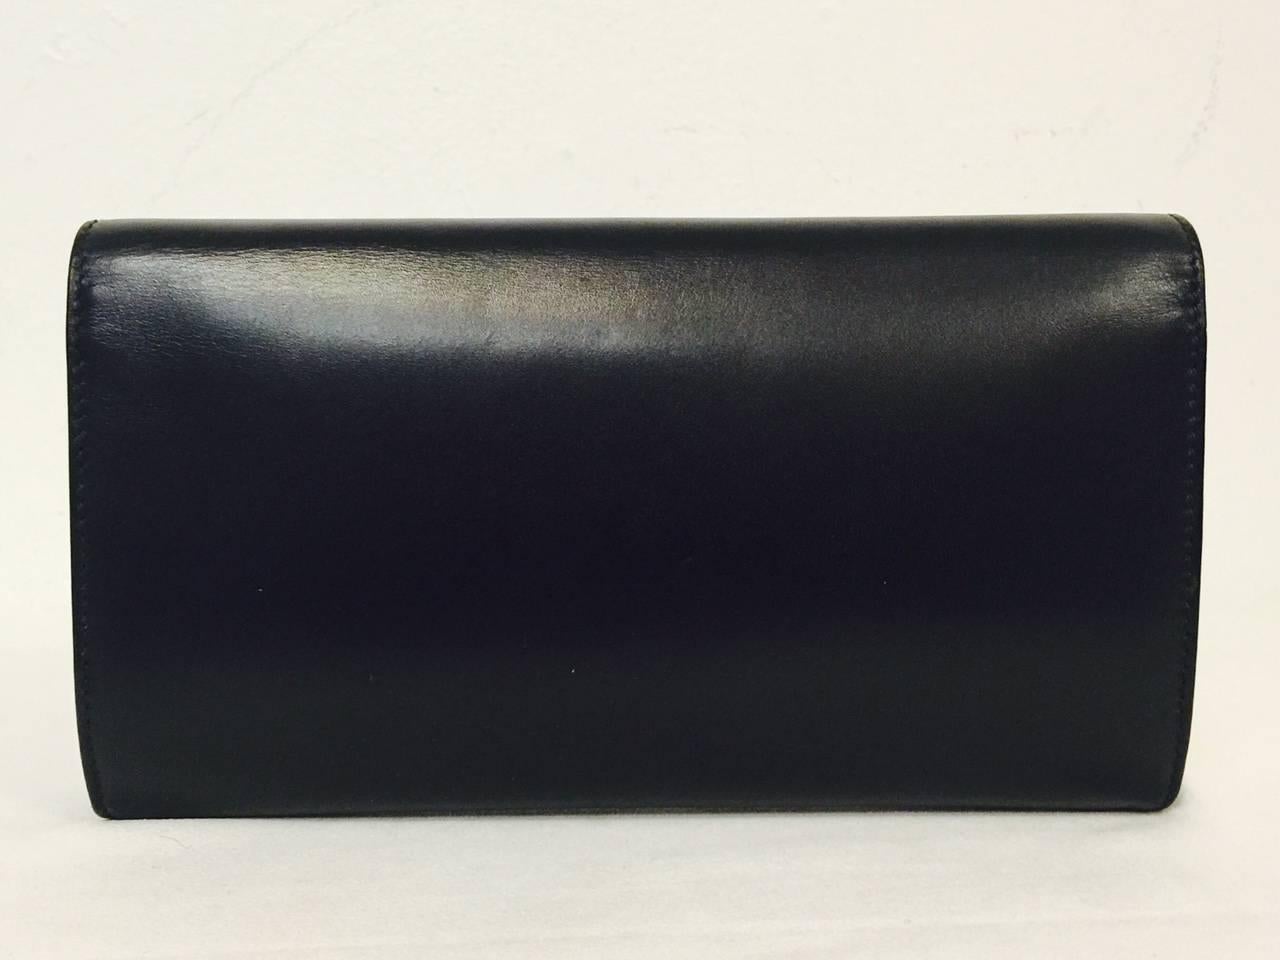 Tiffany & Co. Black Polished Calfskin Large City Clutch Above Excellent  1